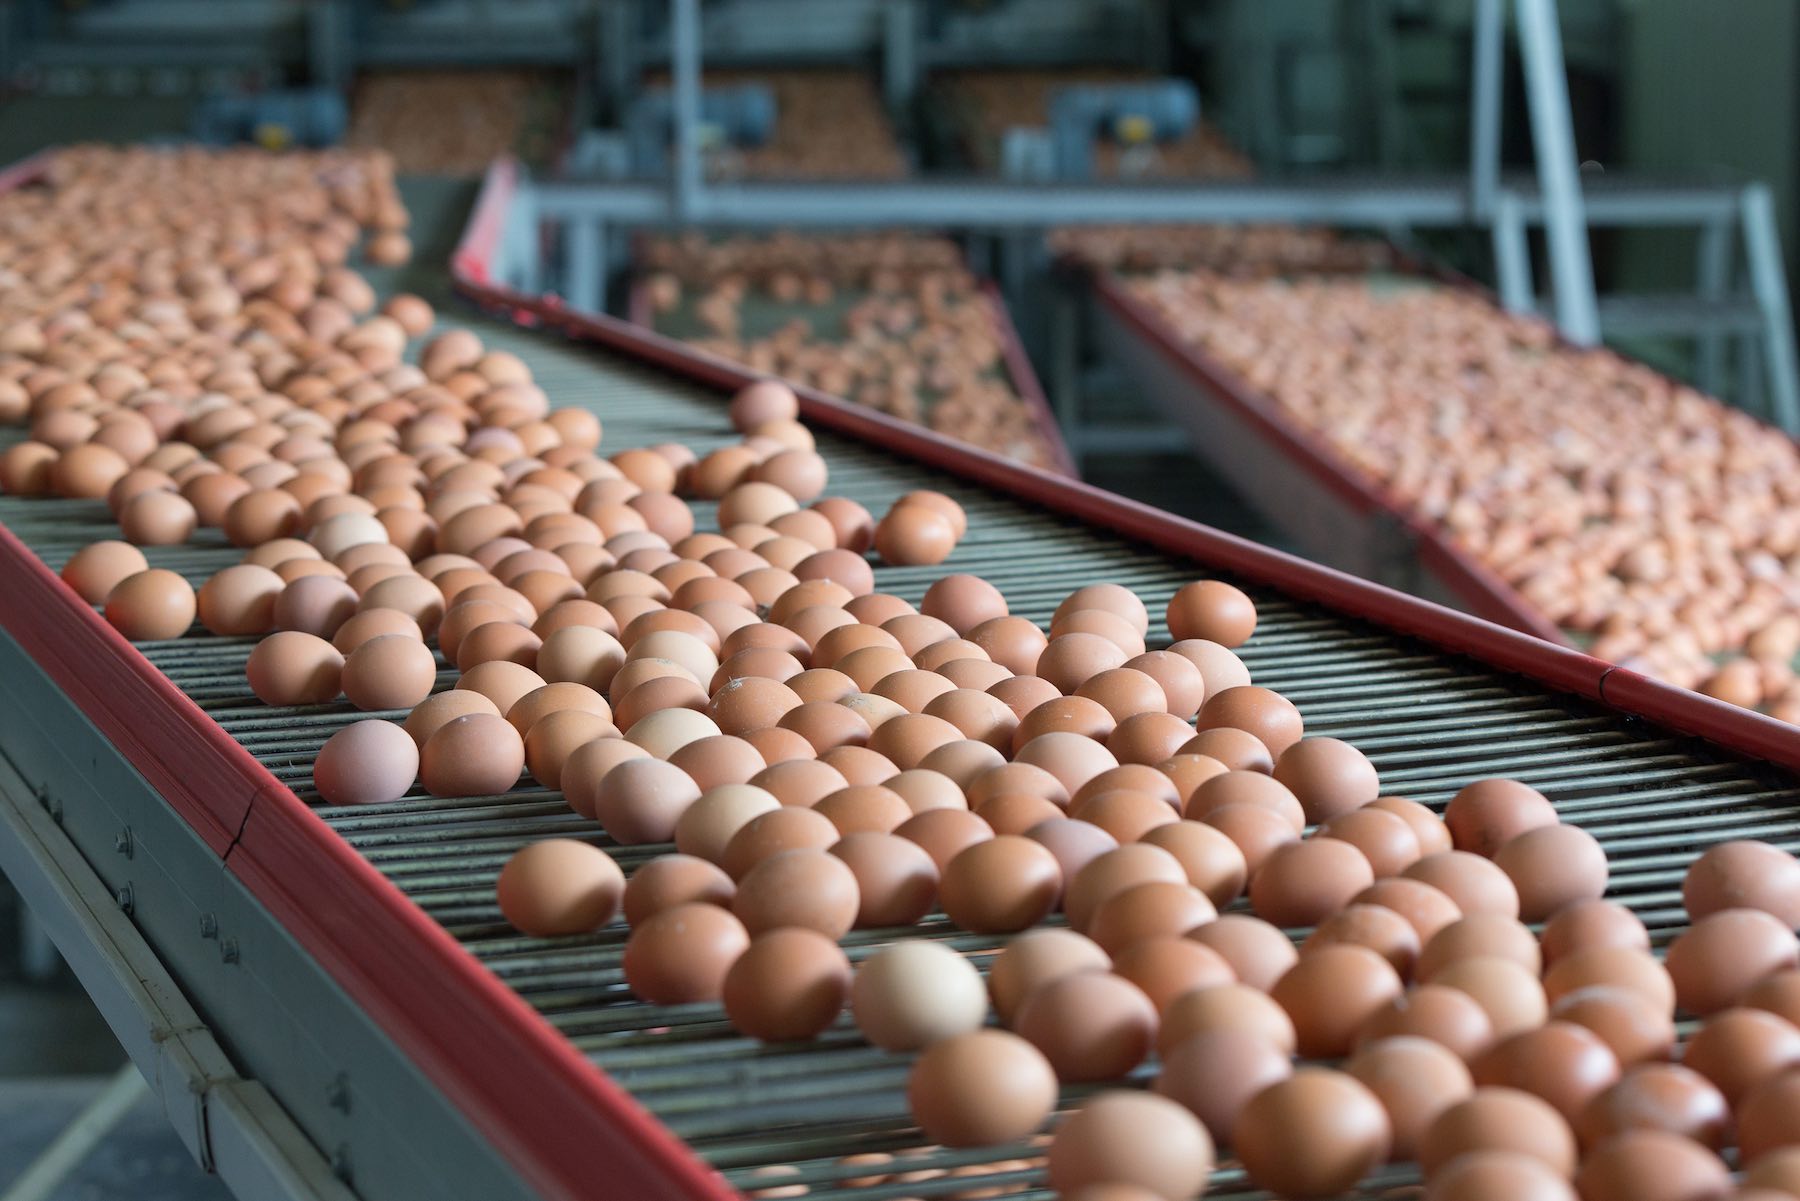 Lubing presents the new Intermediate drive 2.0 for its egg conveyor systems